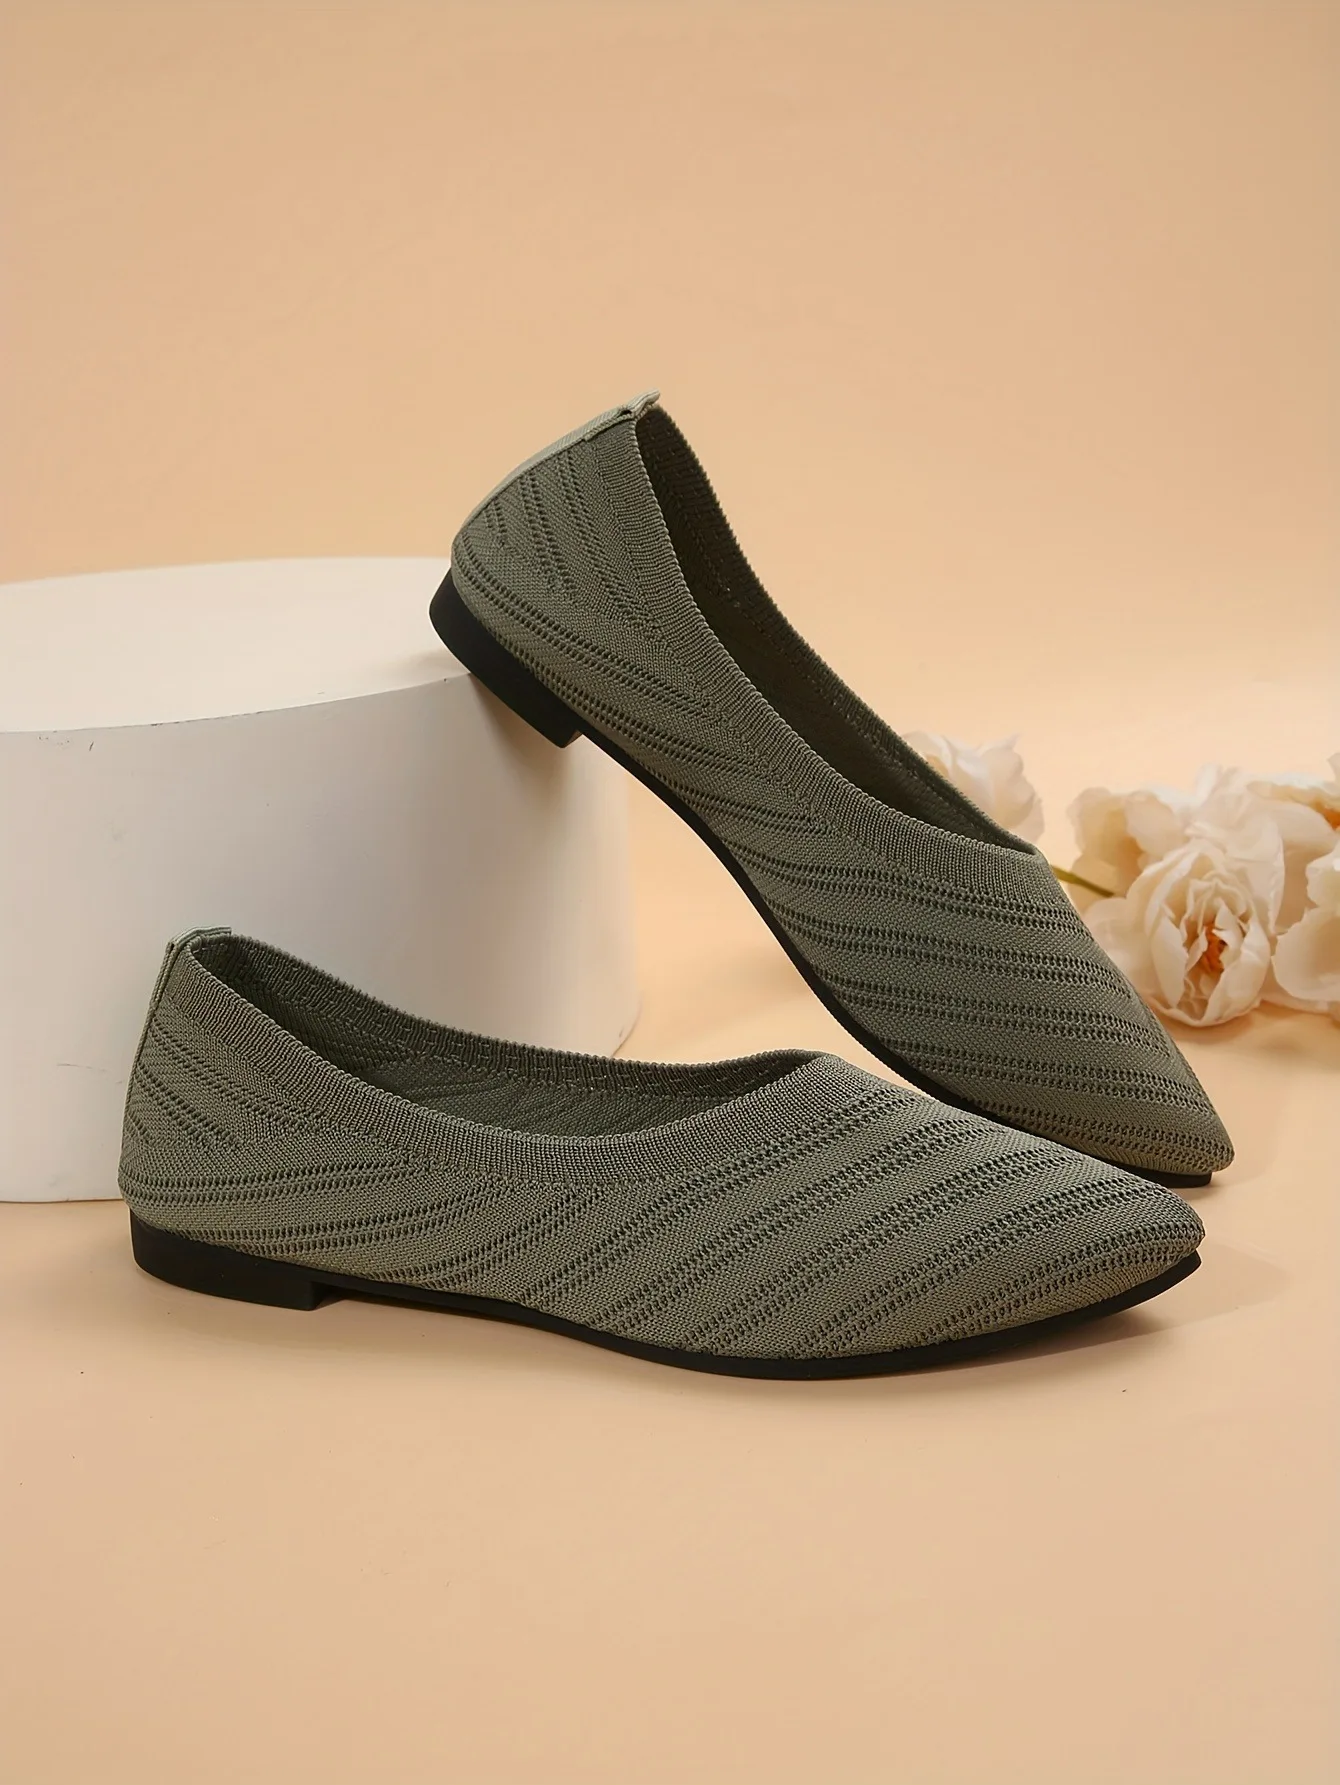 Elegance Elevated: Exploring the World of Women’s Formal Shoes插图3